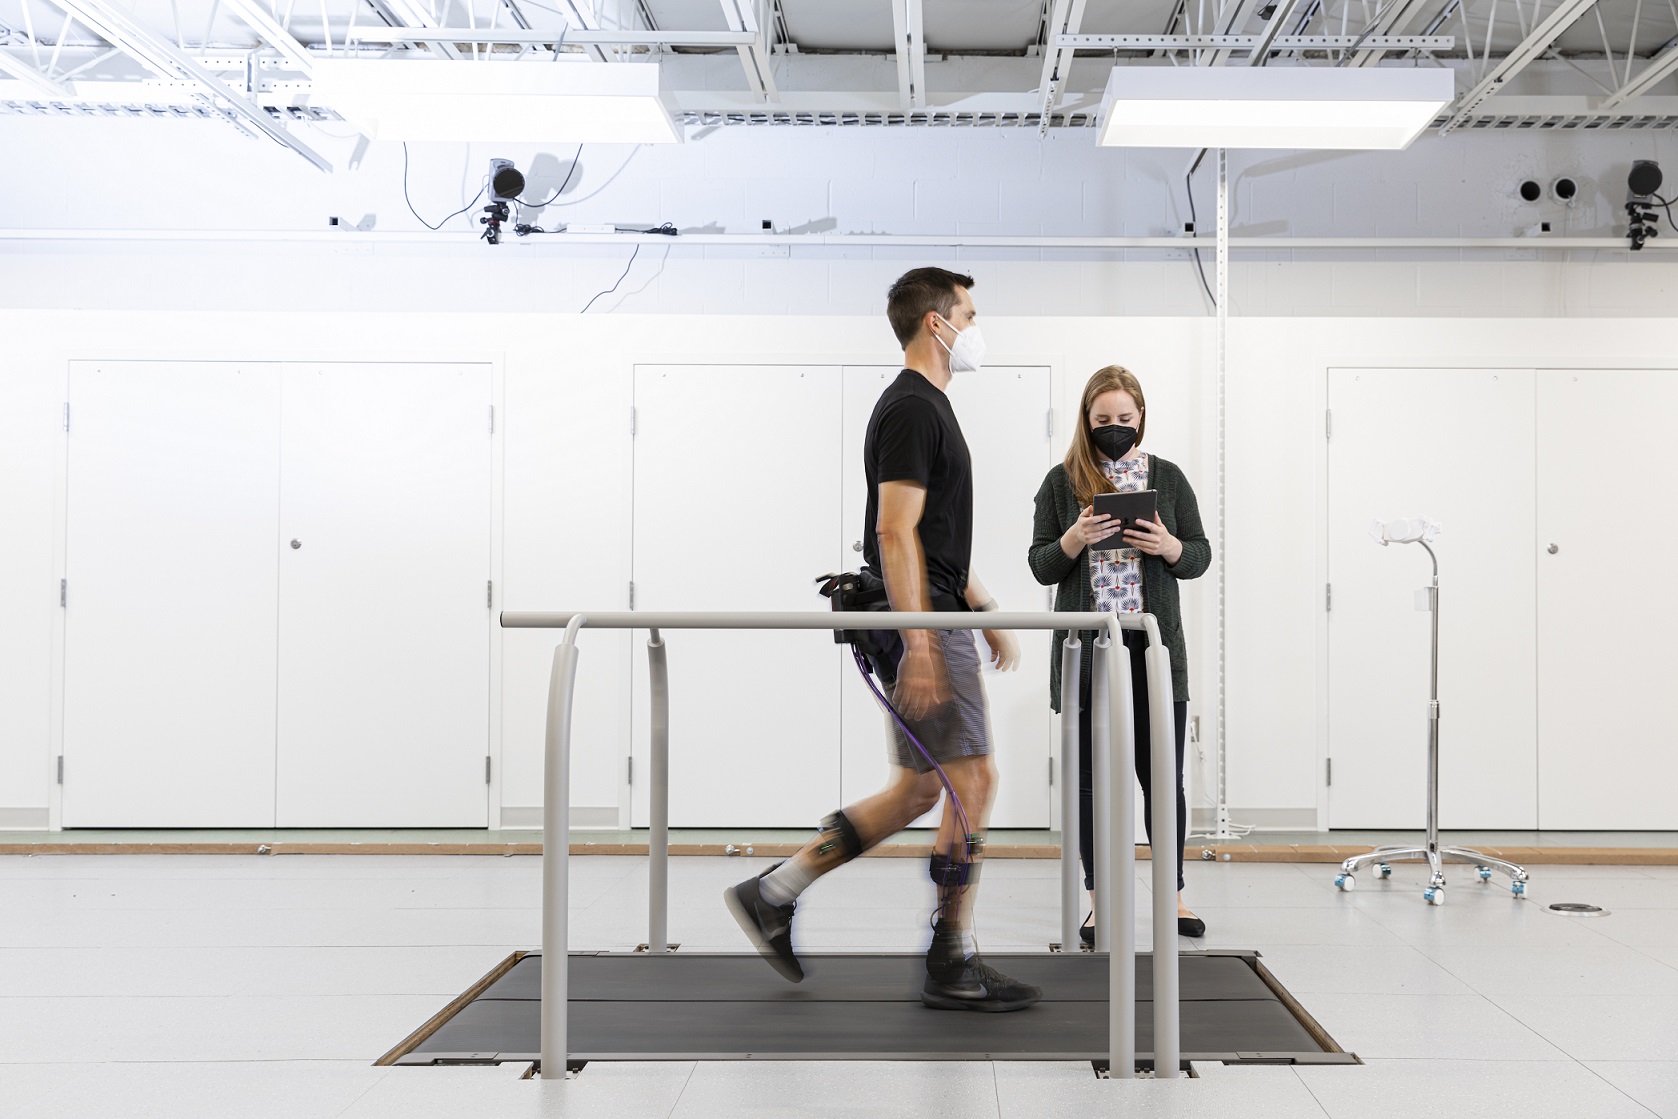 A tall man wearing an exoskeleton is walking on a treadmill in the foreground of a large white room. Alyssa is stanidng next to him looking at an ipad.